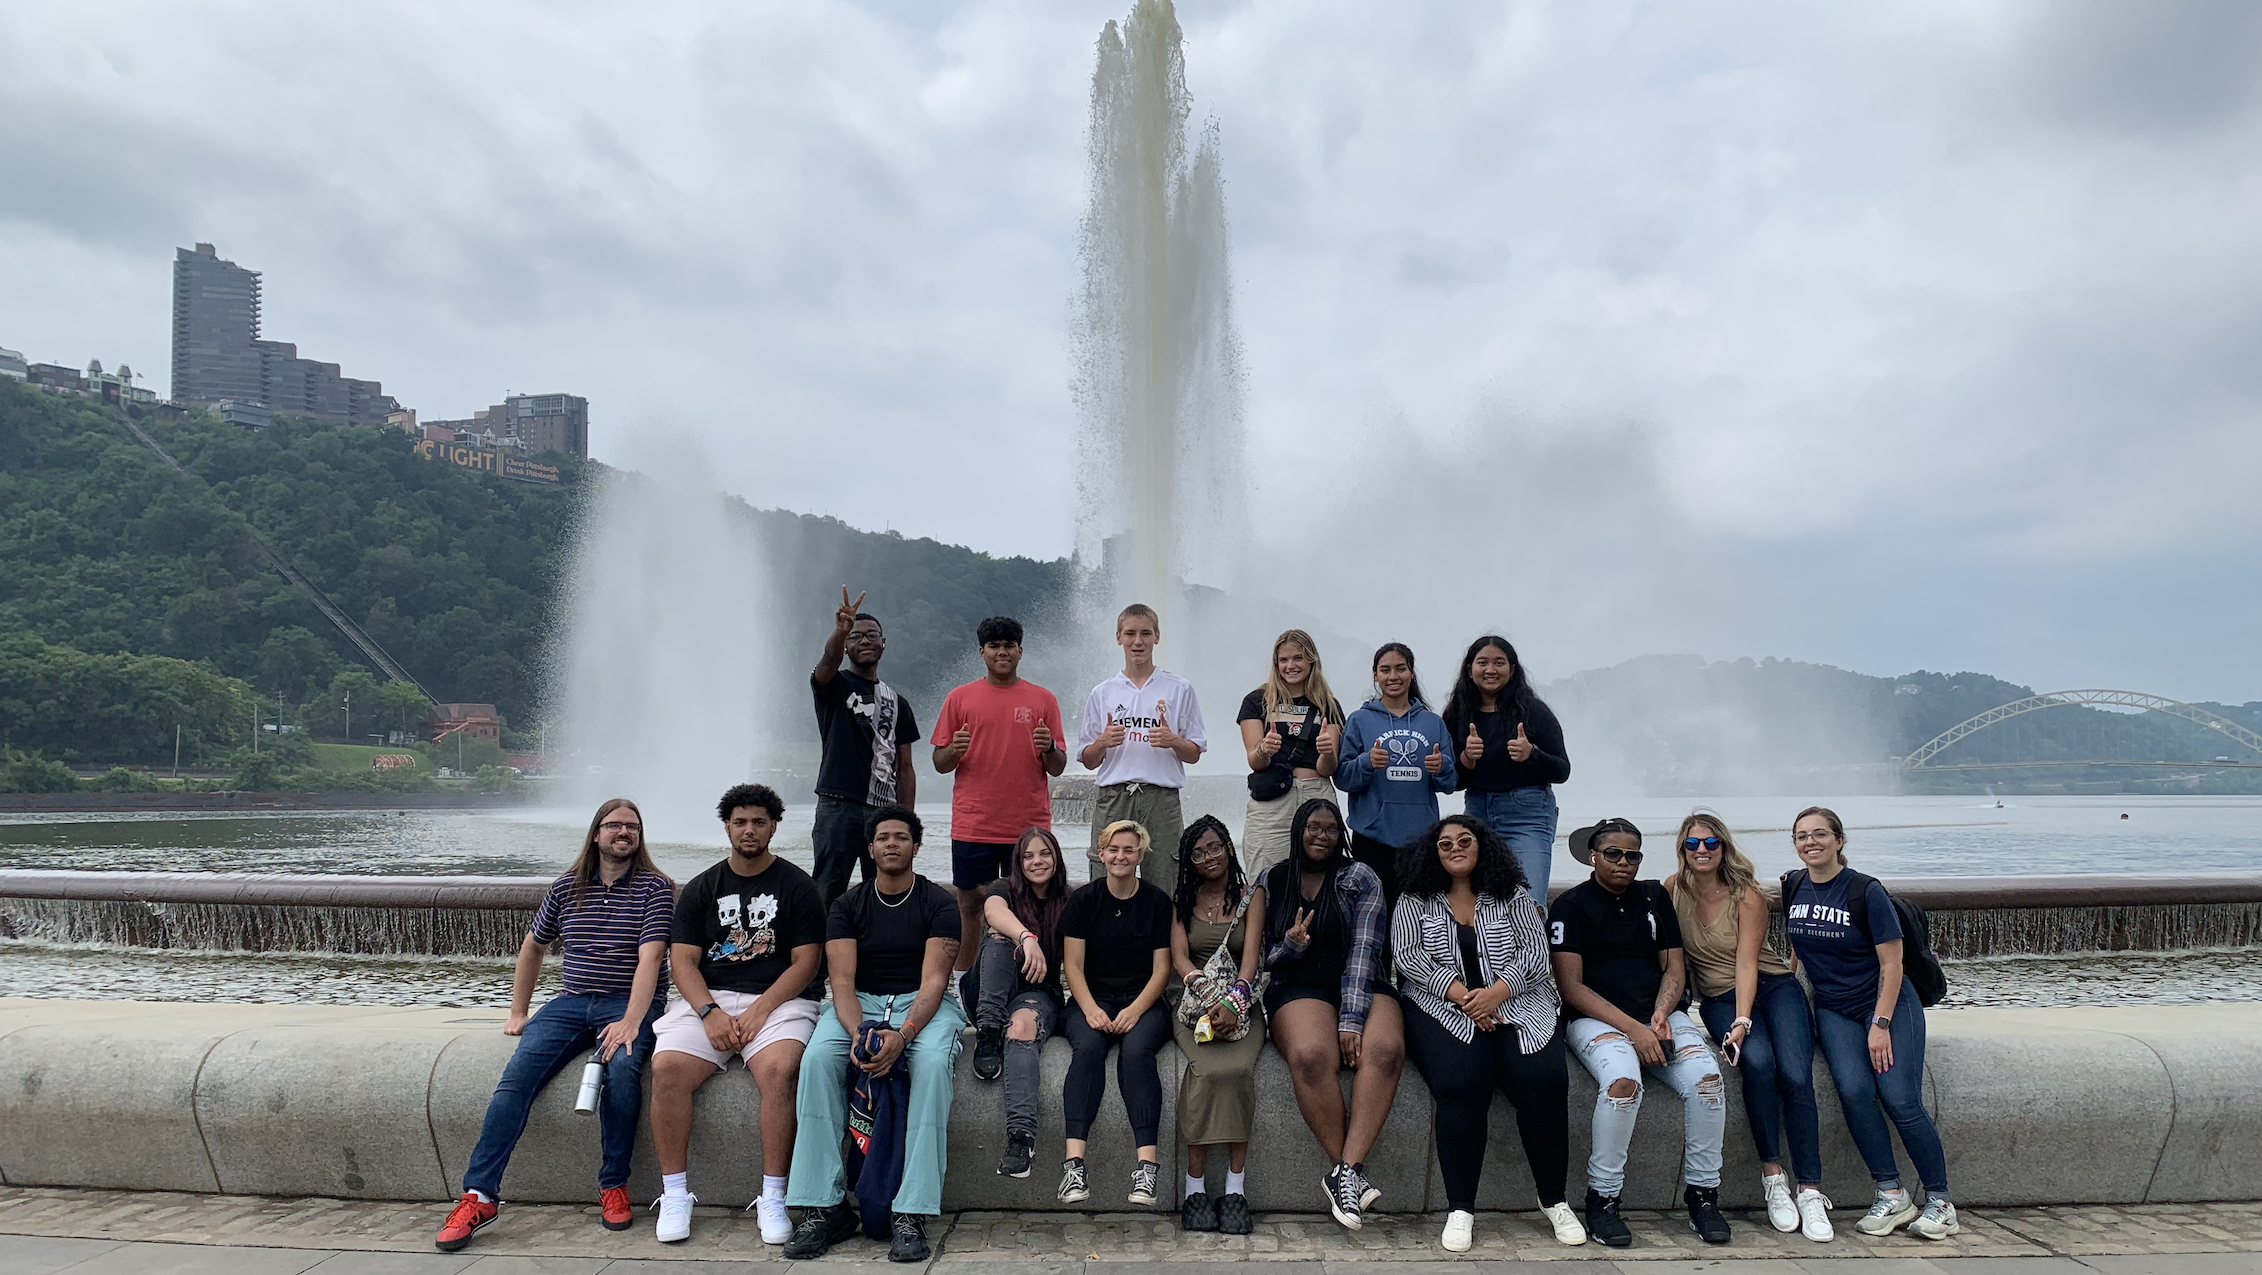 Summer Program learners pose in front of a fountain at Point State Park.